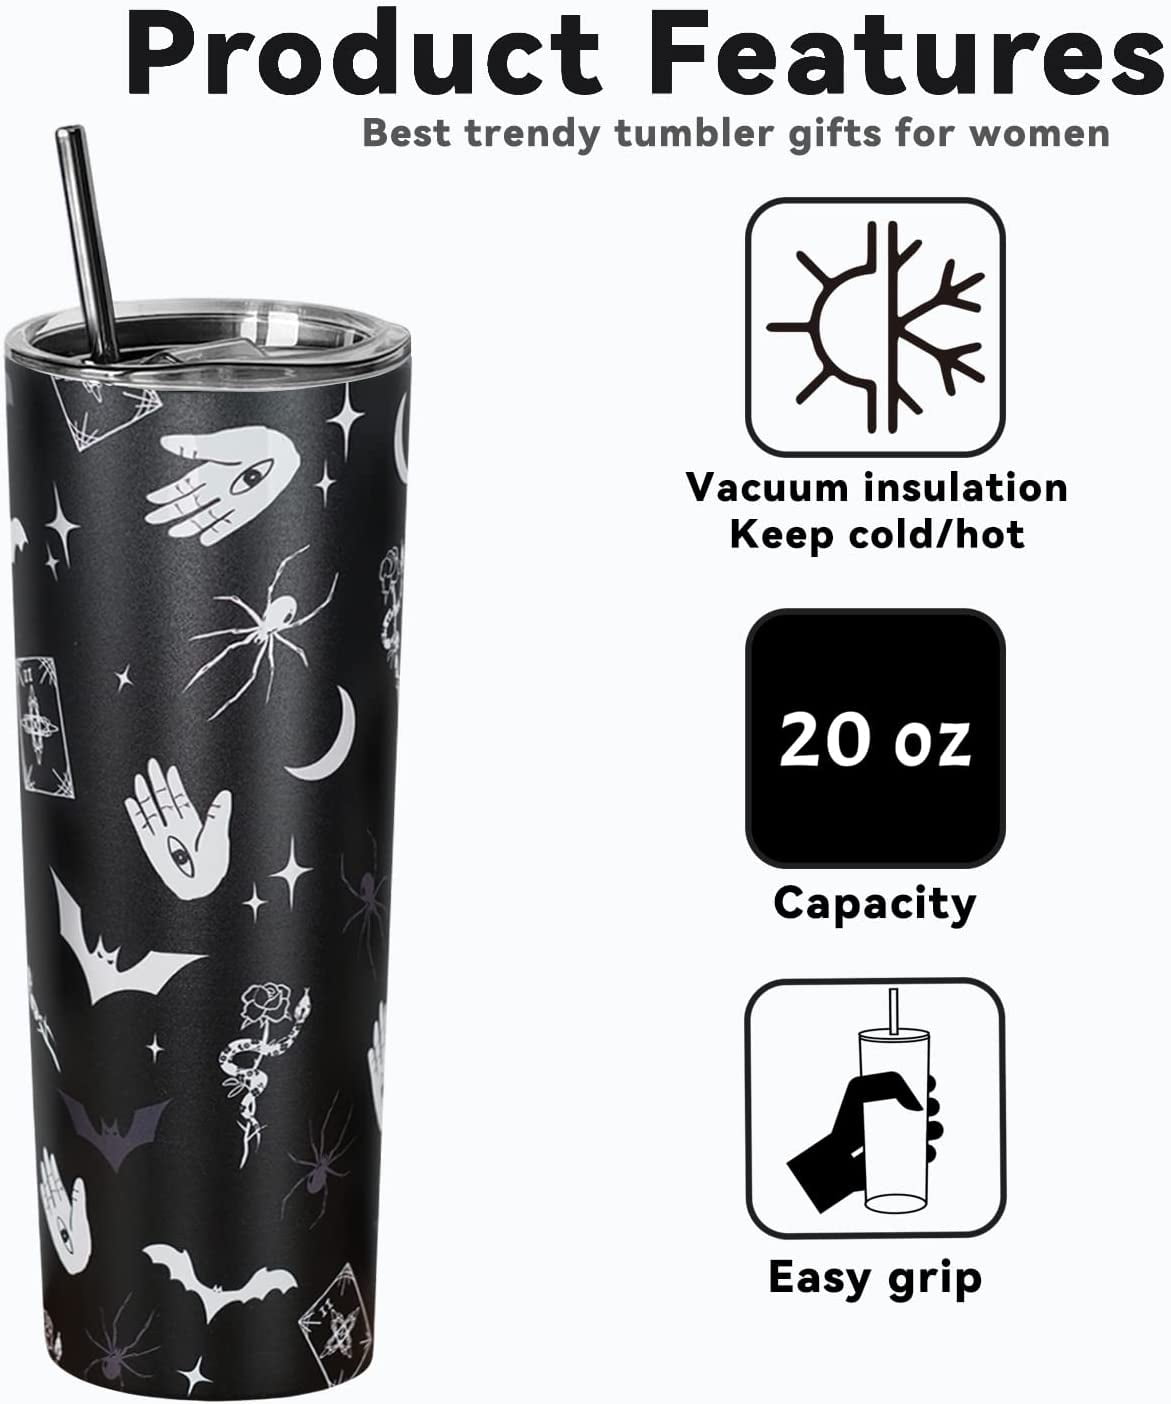 Ceovfoi Goth Moon Tumbler with Lid and Straw, Sun and Moon Cup Gothic Coffee Travel Mug,20 oz Witch Tumbler Cup,Witchy Gifts for Women Goth Decor